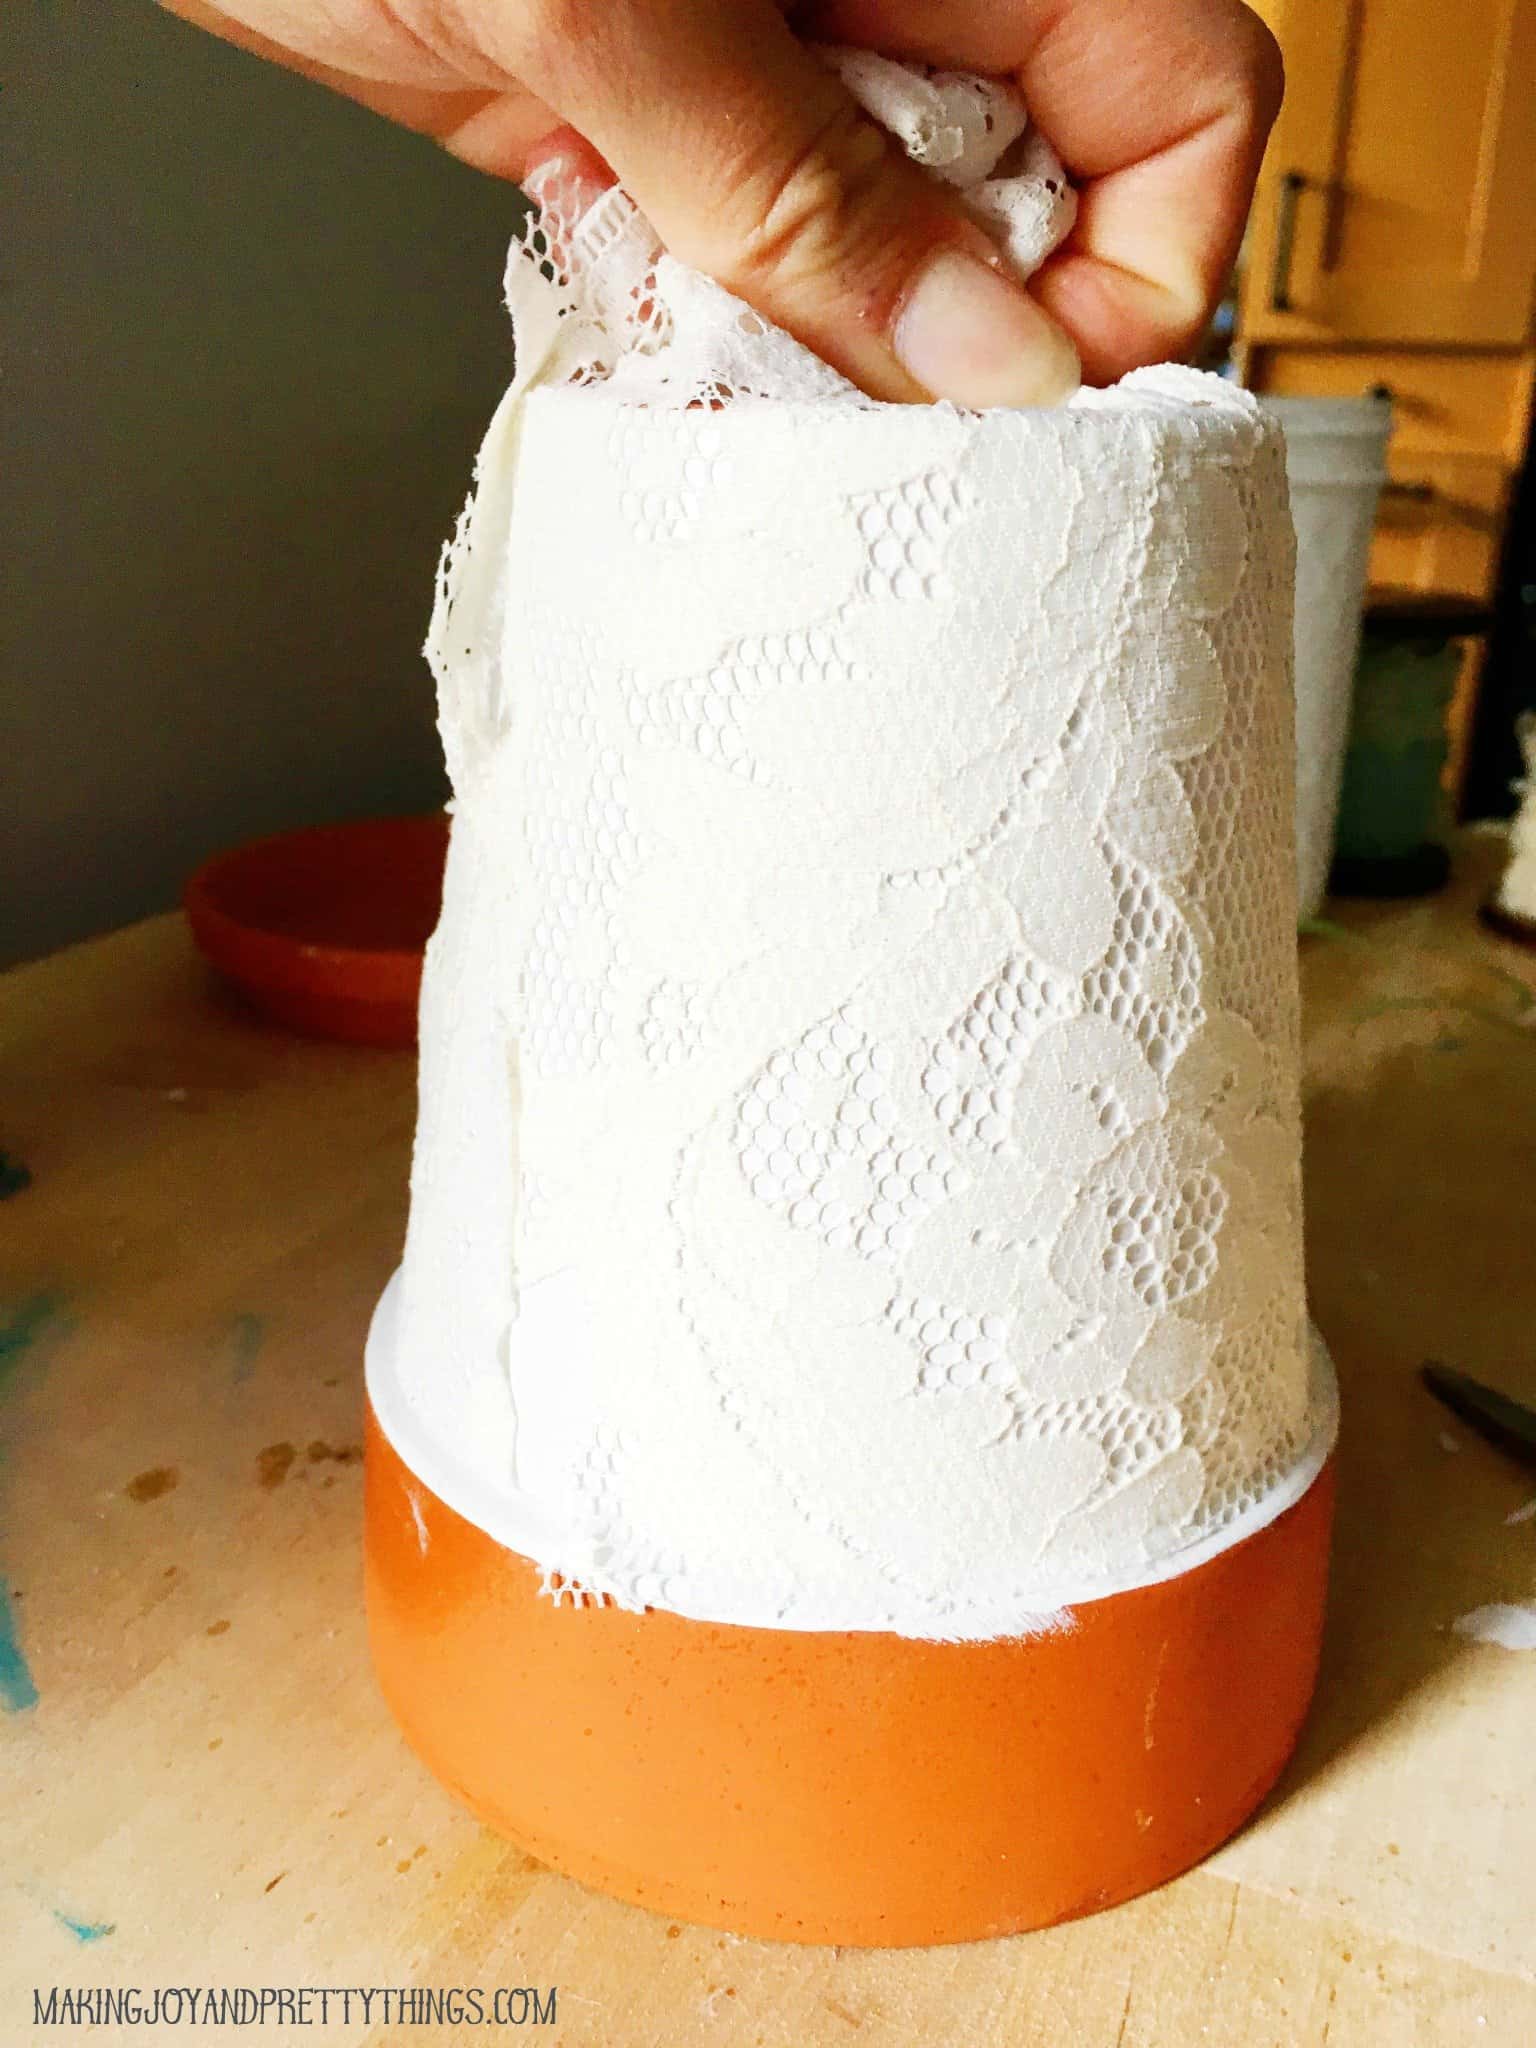 A woman's hand wraps lace fabric around an upside-down terra cotta pot. The pot is painted white, and the lace fabric is bunched at the bottom of the pot.